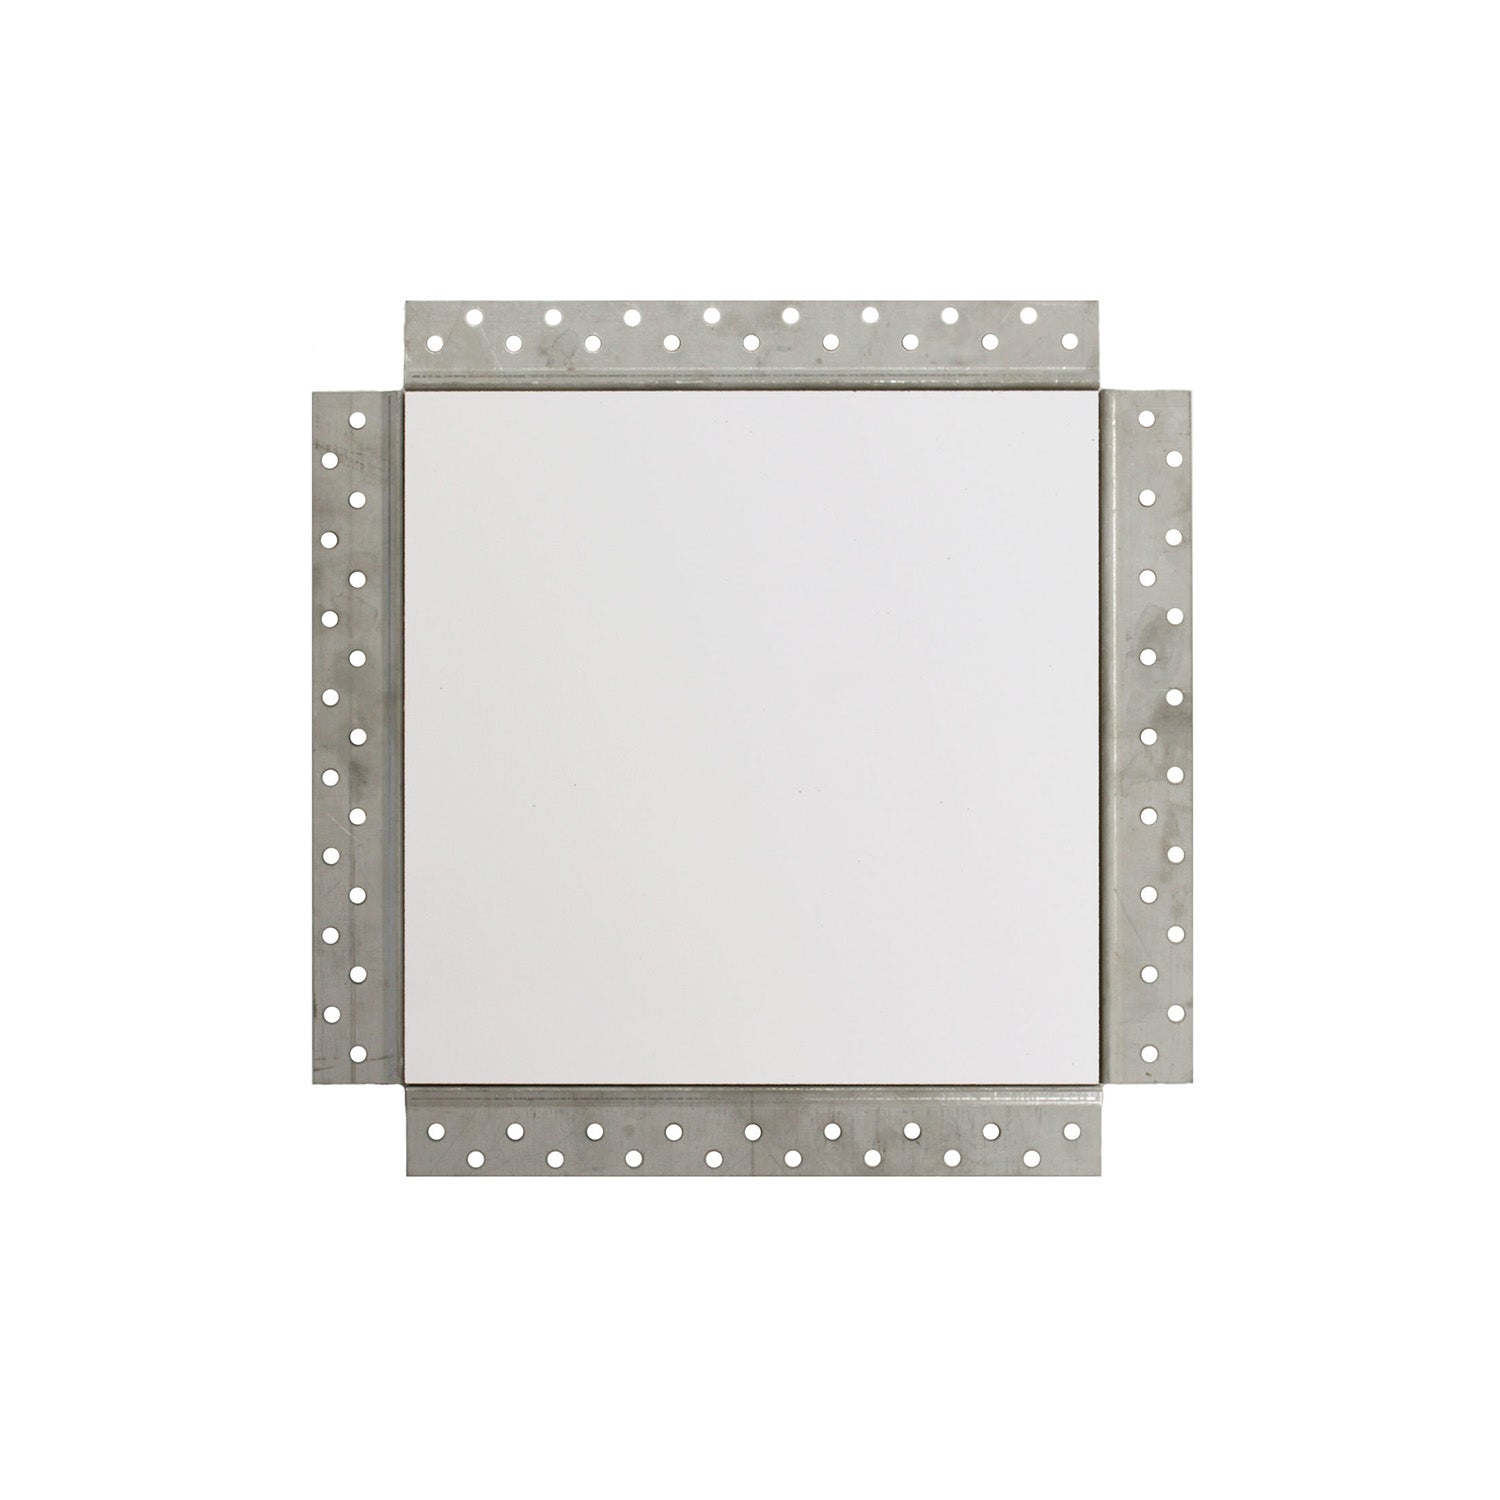 ENVISIVENT (CB5007) – Magnetic Mud-In Flush Mounted Access Panel. For 12” x 12” Drywall Opening